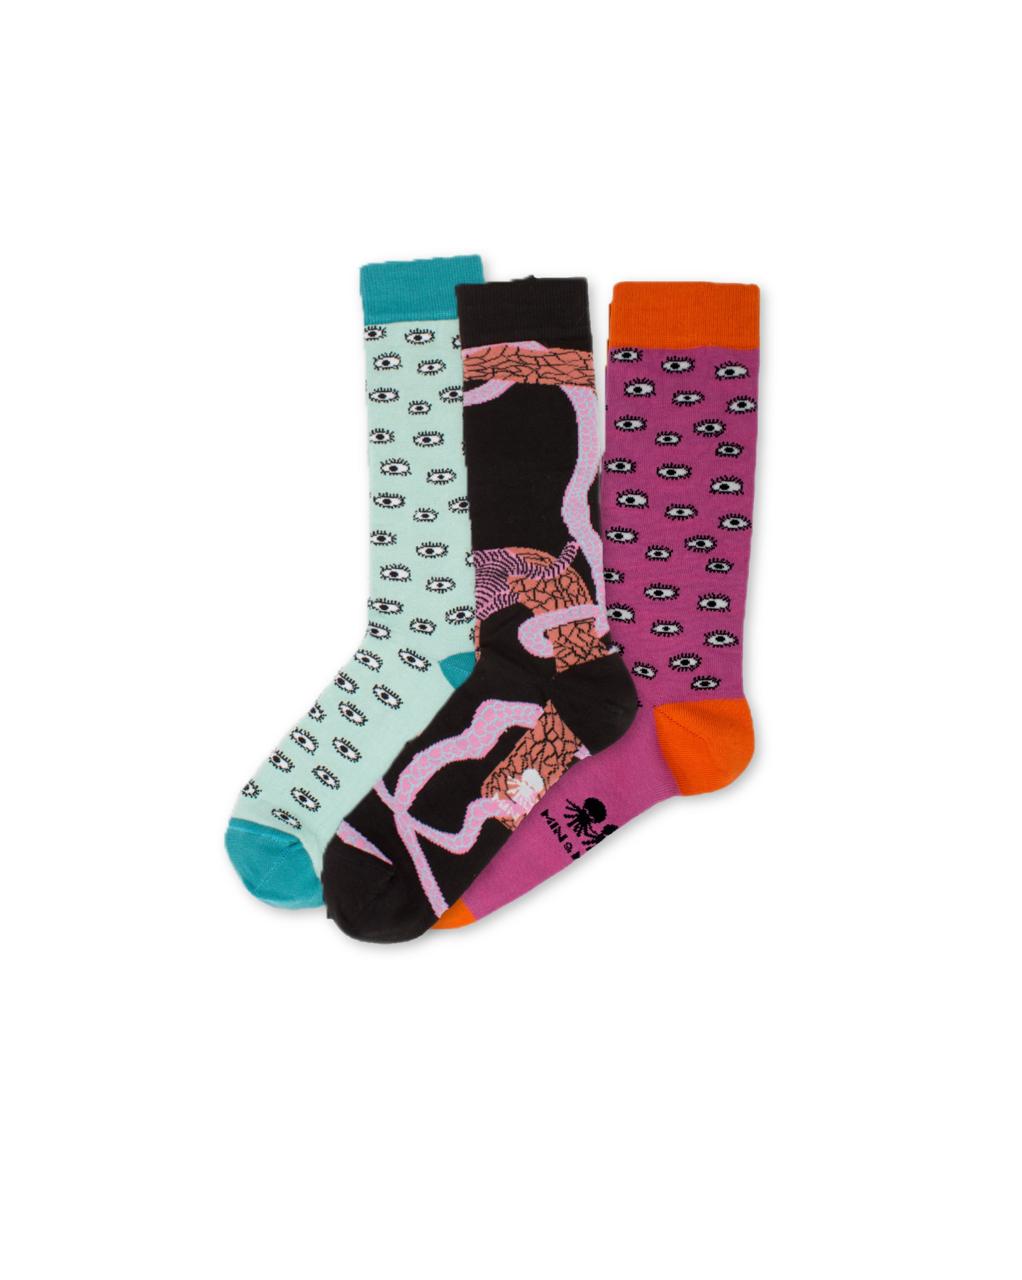 Set of 3 Socks - All Over Eyes and Tangle Rumble